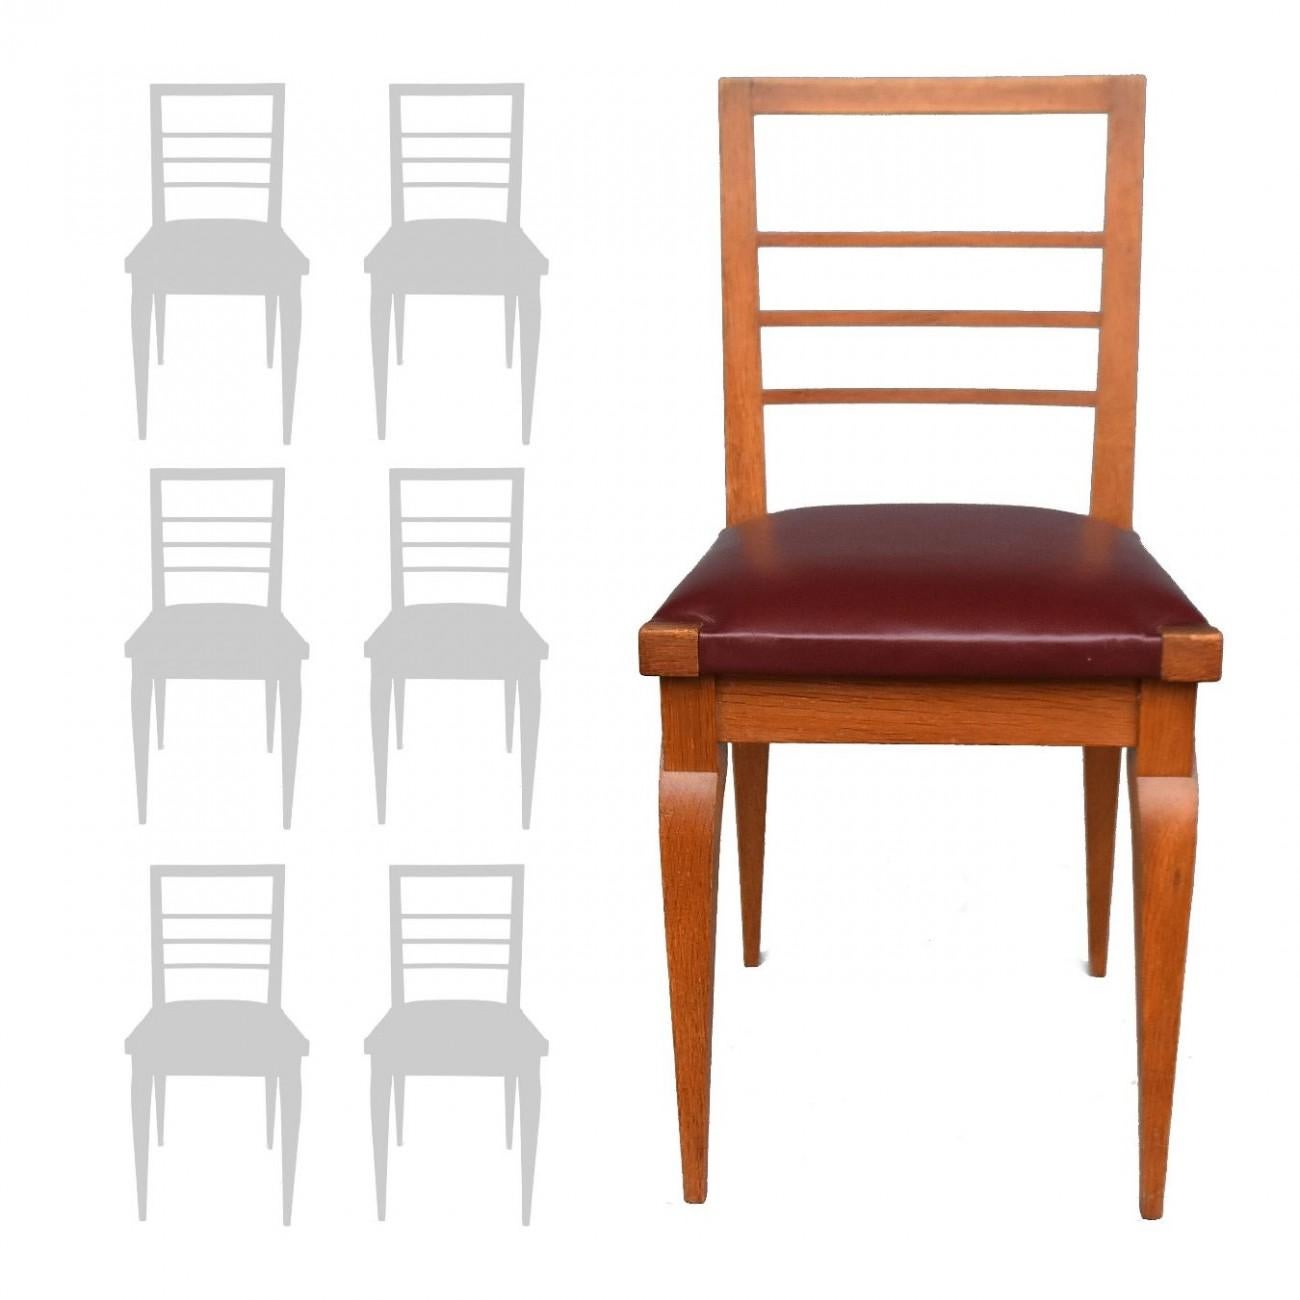 Series of 6 oak chairs burgundy leather top 1930 by Auguste Vallin height dimension 85 cm and a width of 41 cm and depth of 43 cm. From the estate of Auguste Vallin in Marseille, Auguste Vallin architect and designer son Eugene Vallin.